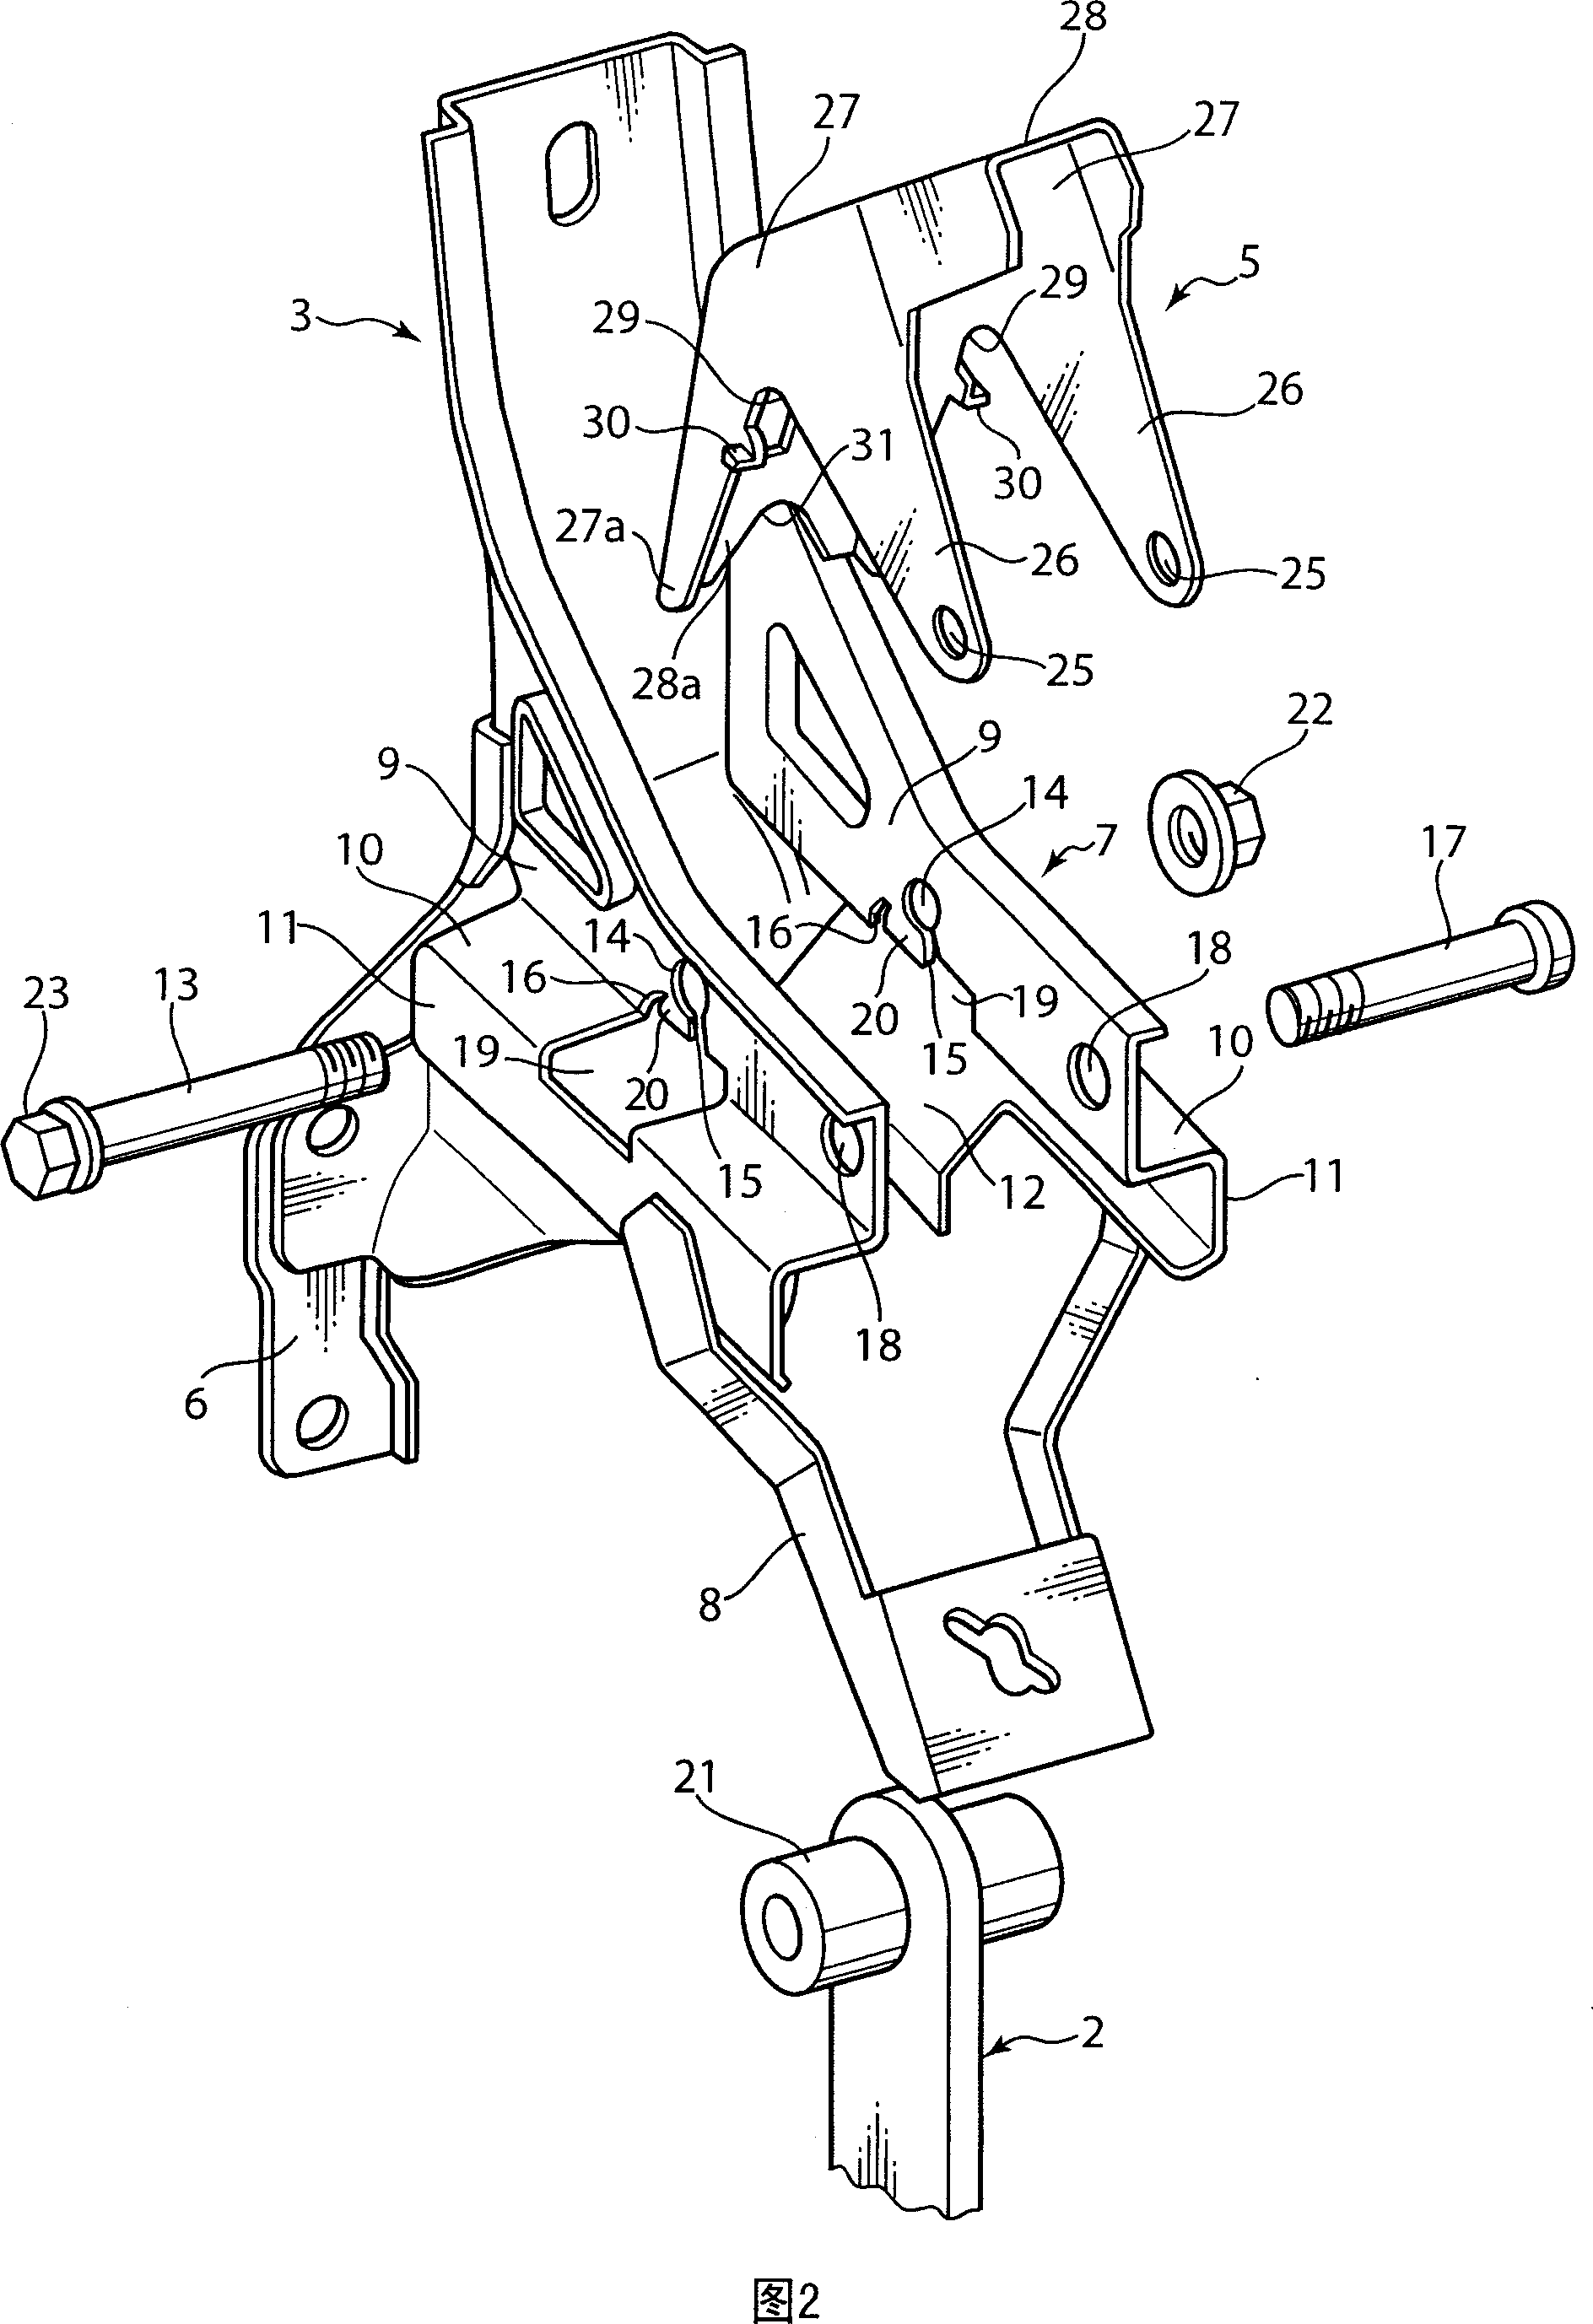 Support structure for control pedal